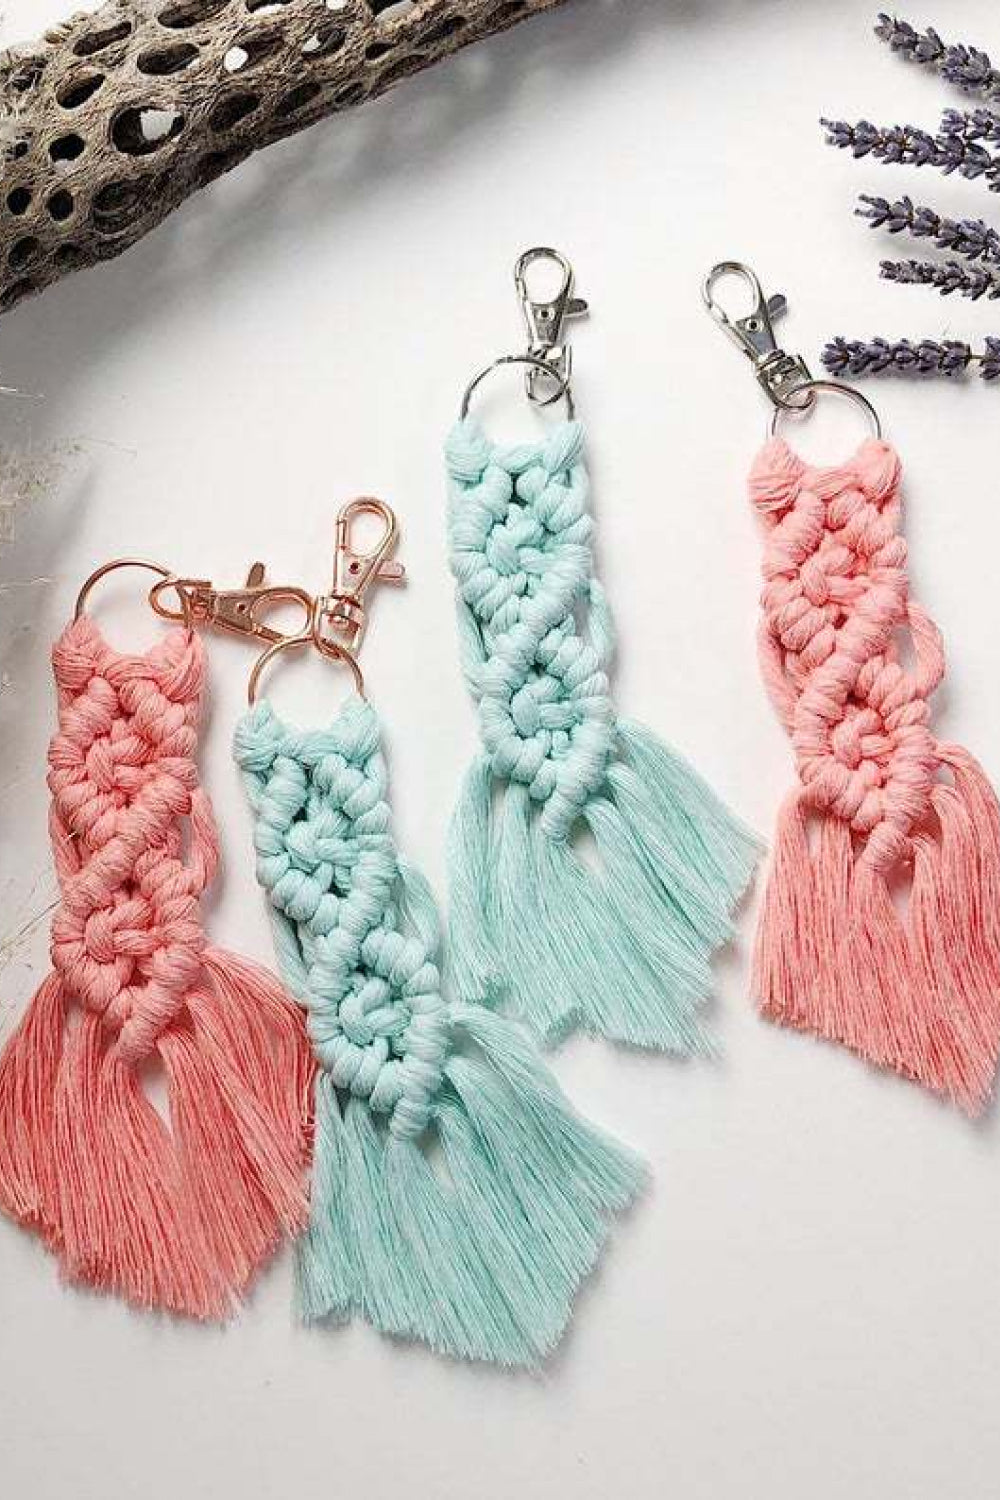 Trendsi Cupid Beauty Supplies Keychains Assorted 4-Pack Macrame Fringe Keychain